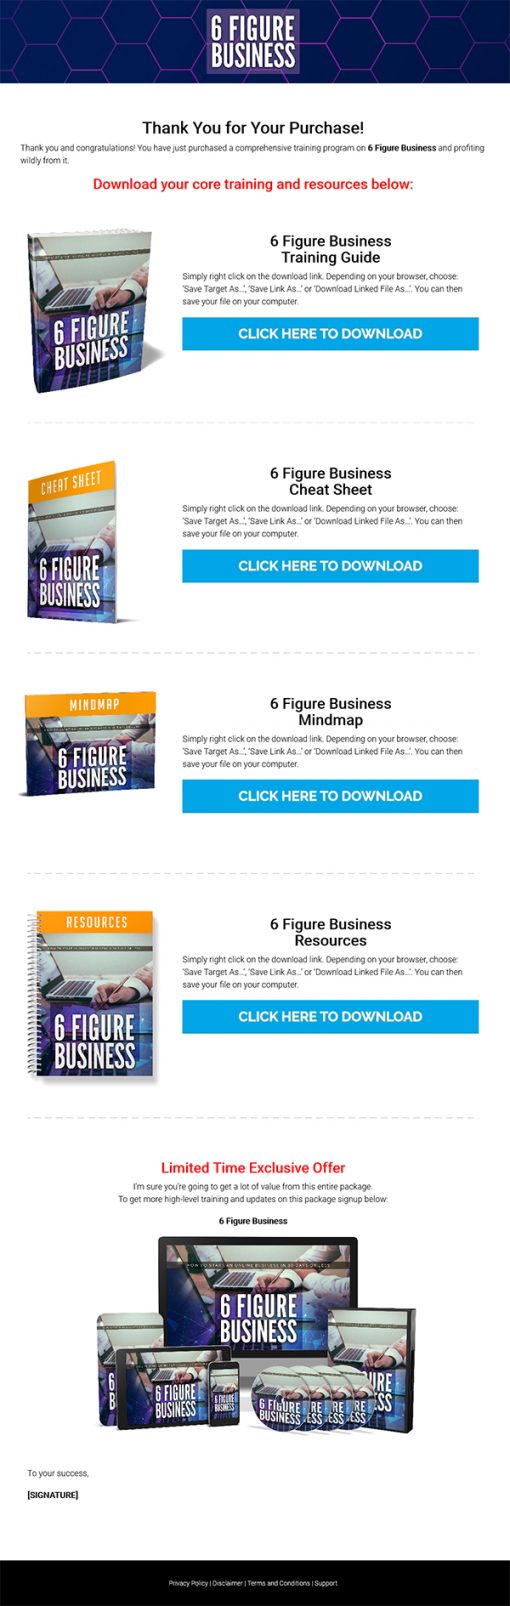 Six Figure Business Ebook and Videos MRR